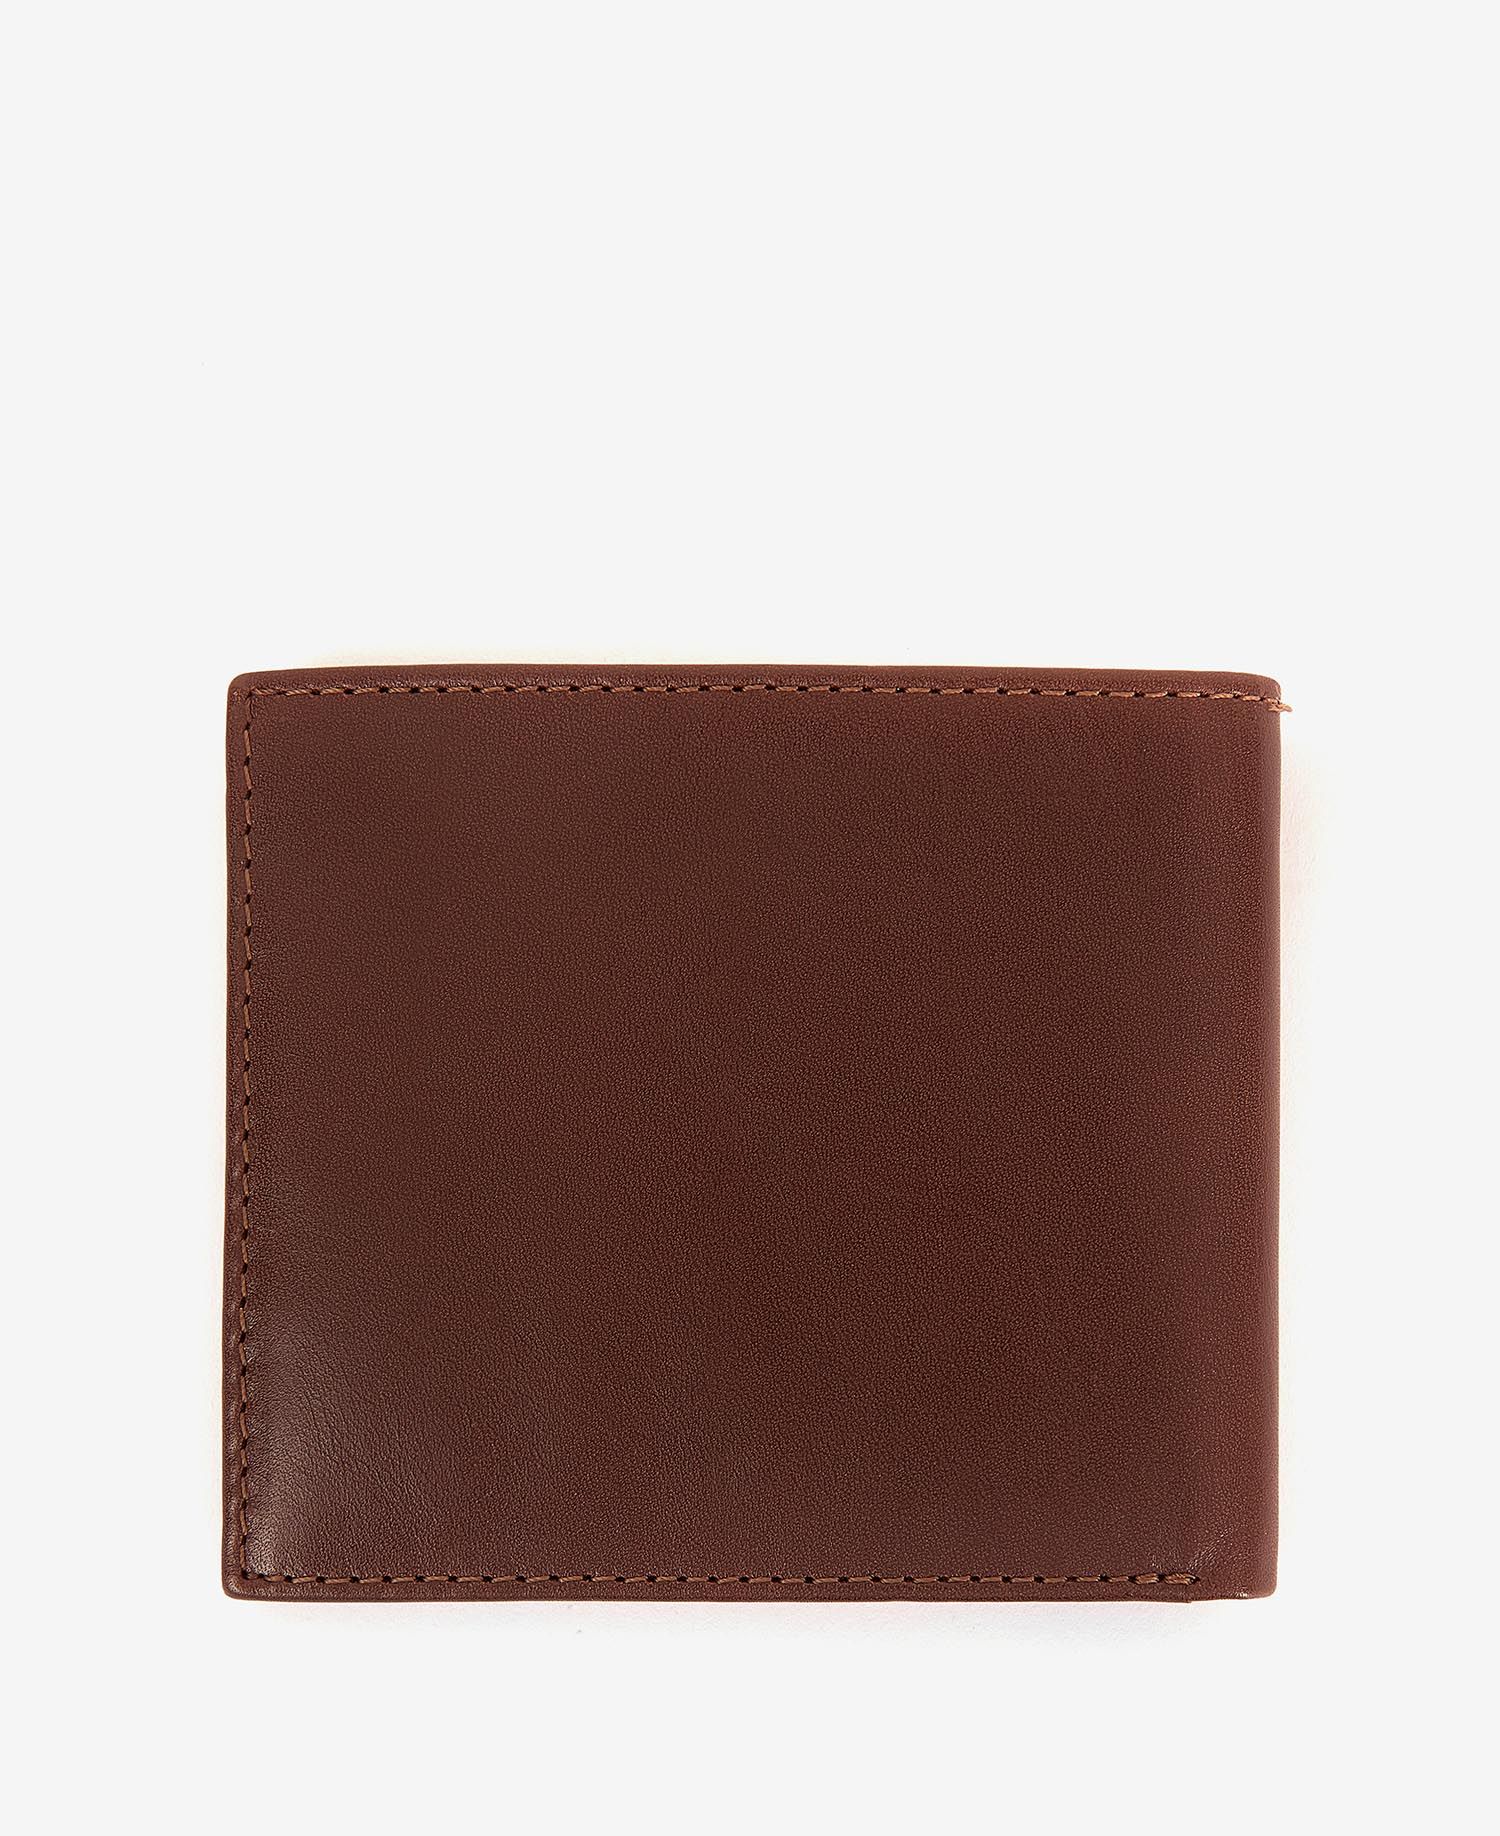 Shop the Barbour Colwell Leather Billfold Wallet in Brown today. | Barbour